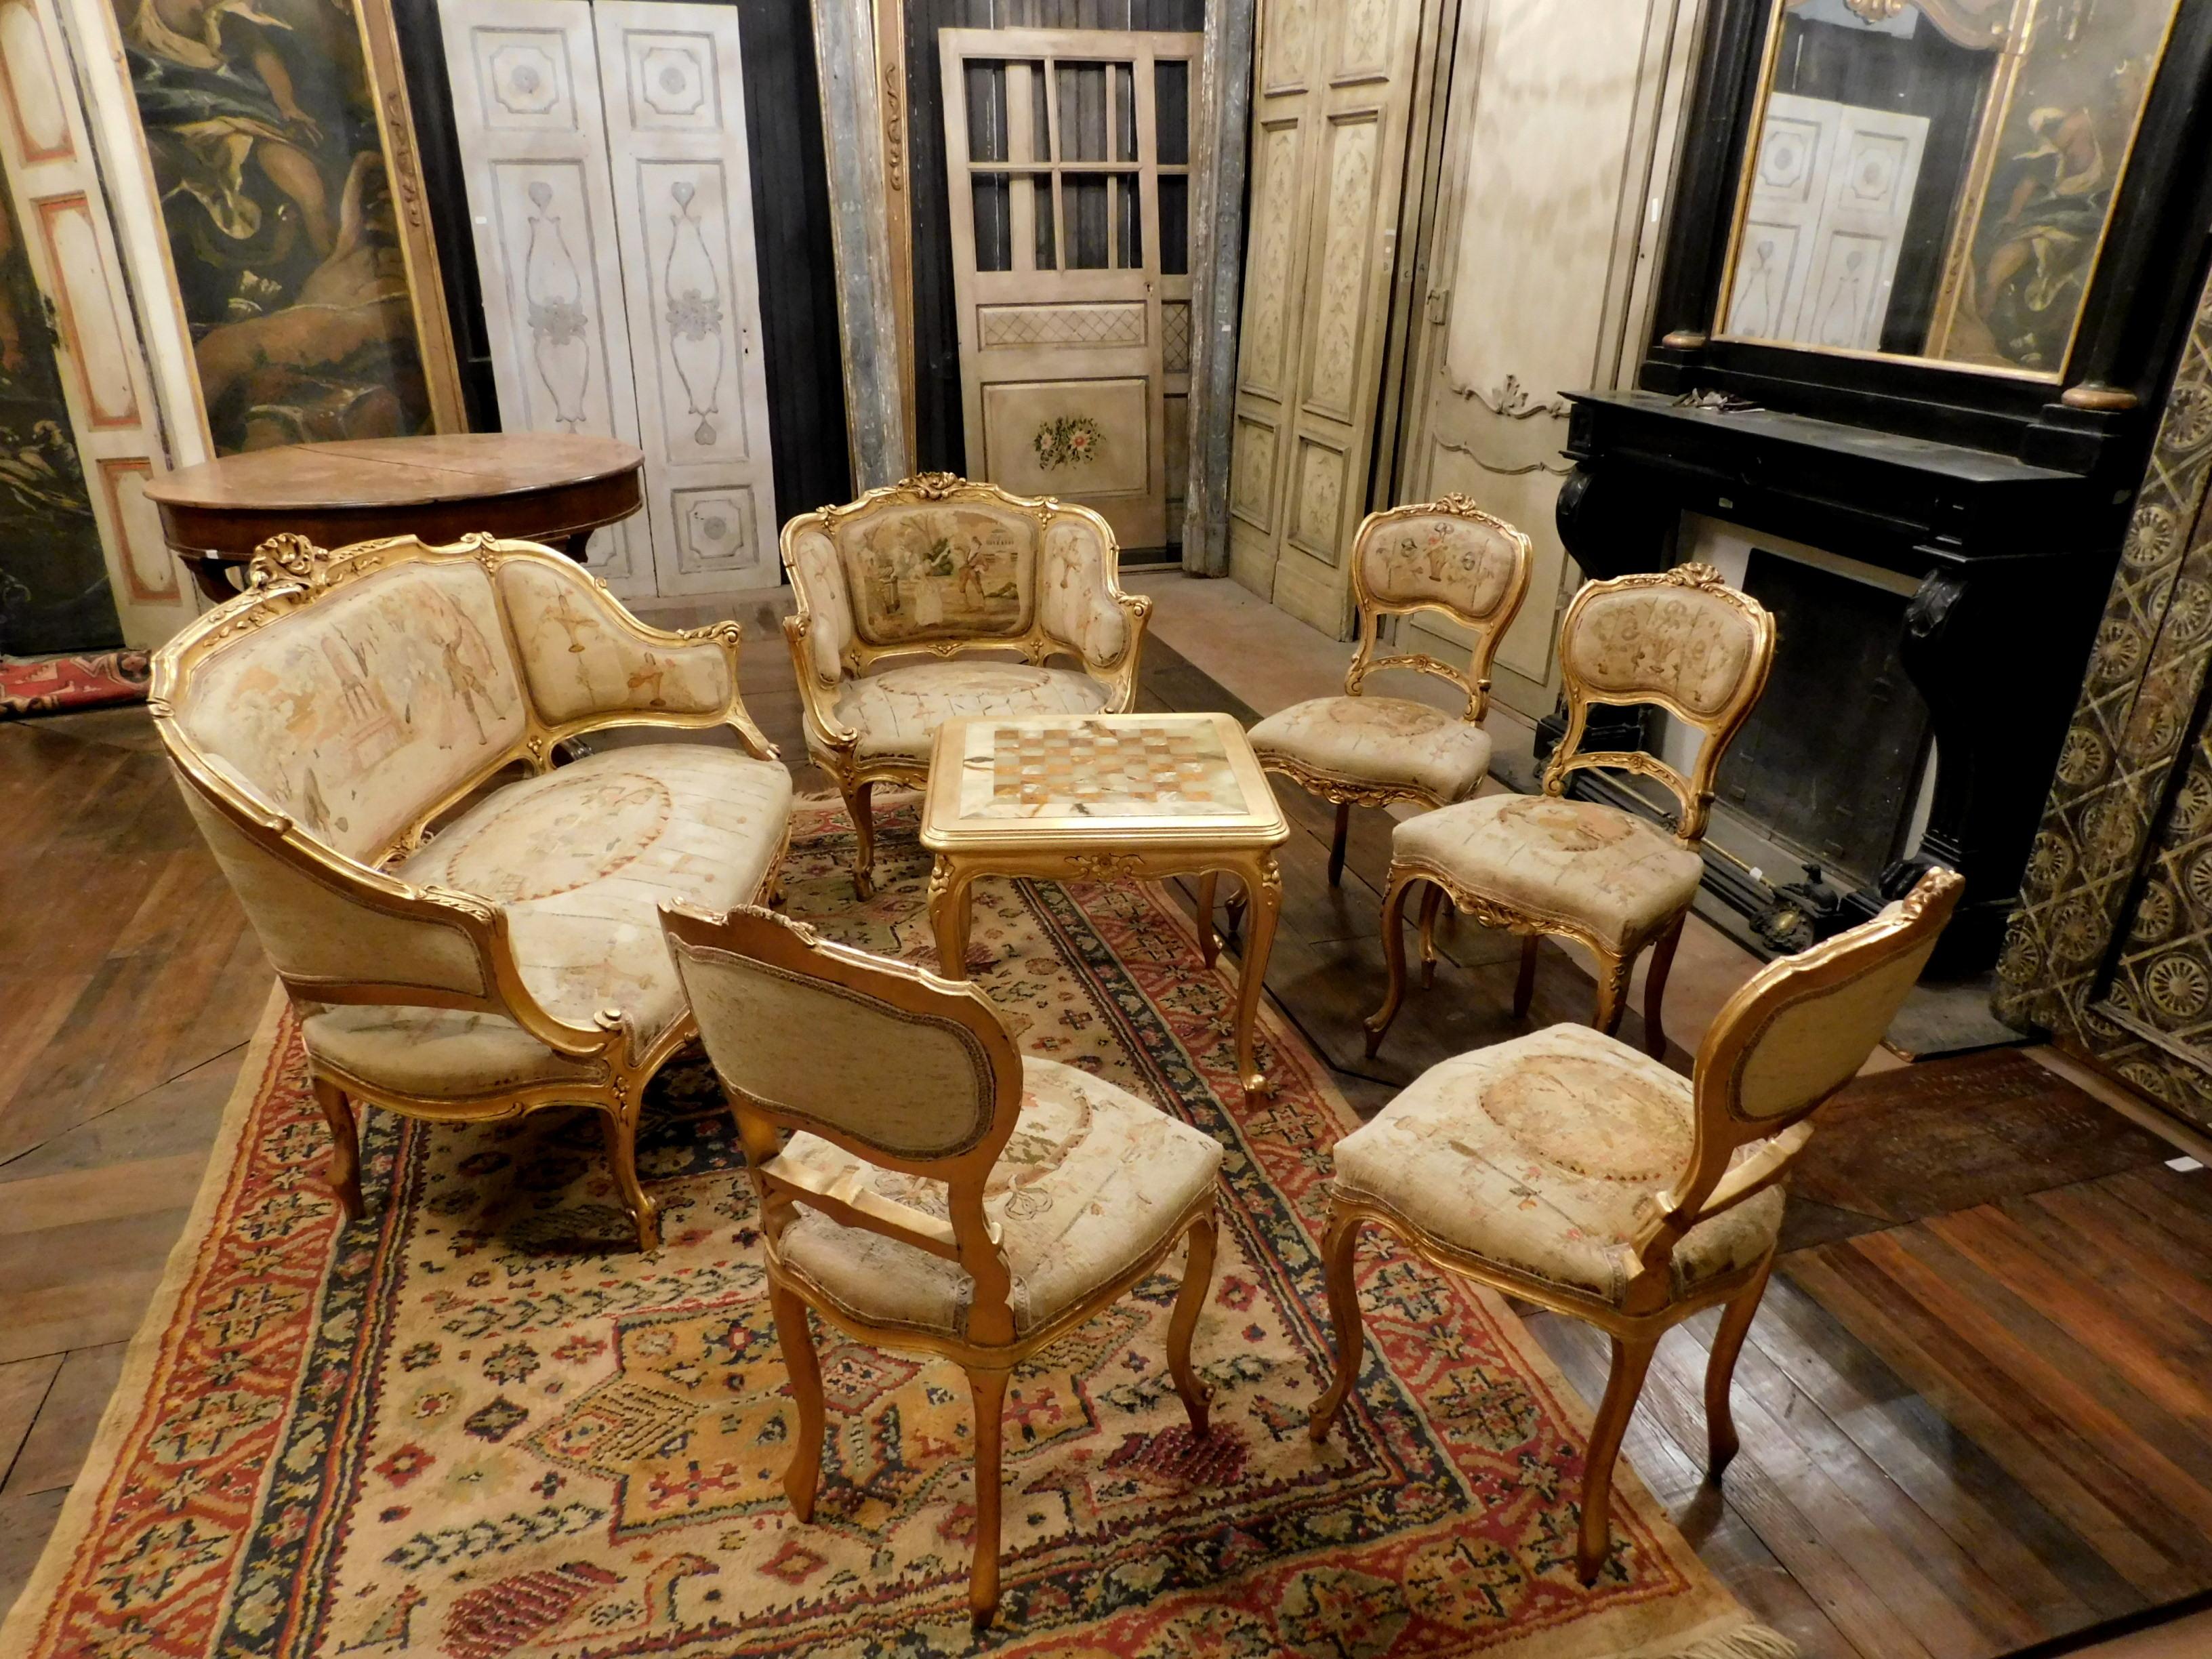 Vintage antique golden living room complete, hand built in the late 19th century in Italy, consisting of a sofa, an armchair, 4 chairs and a coffee table, gilded sculpted structure with upholstery in excellent condition depicting worldly scenes